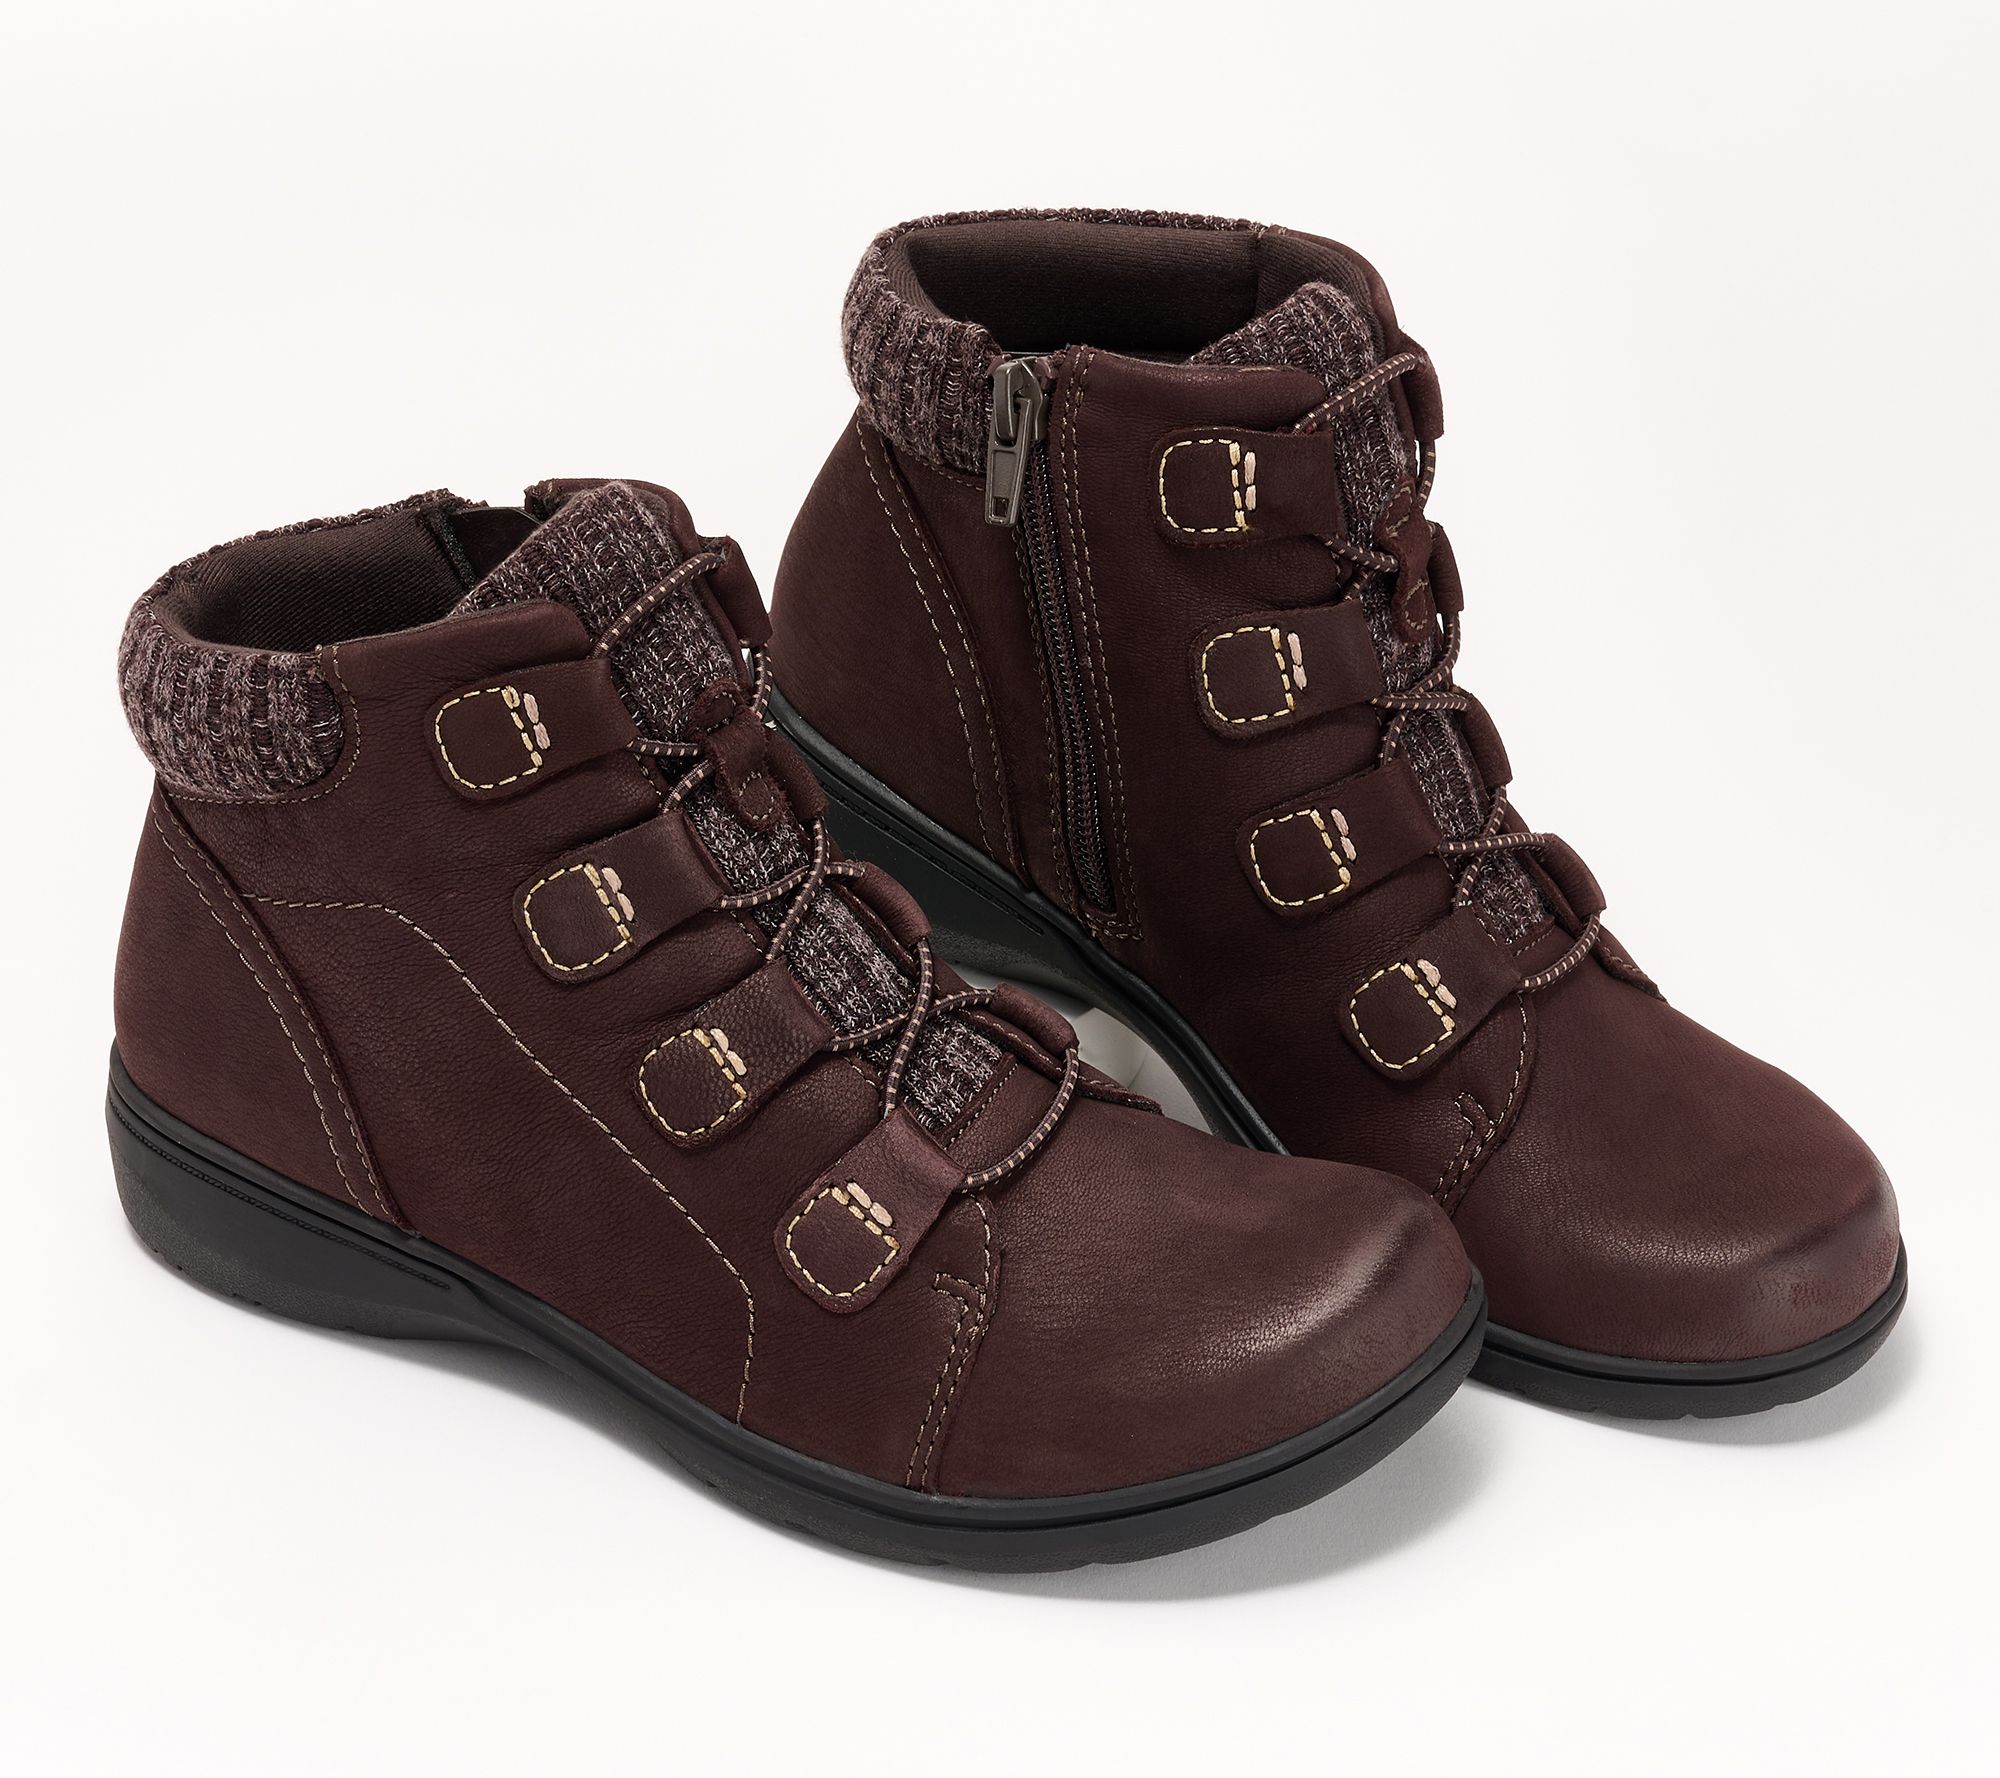 Clarks Collection Leather & Knit Ankle Boots- Carleigh Jade - QVC.com